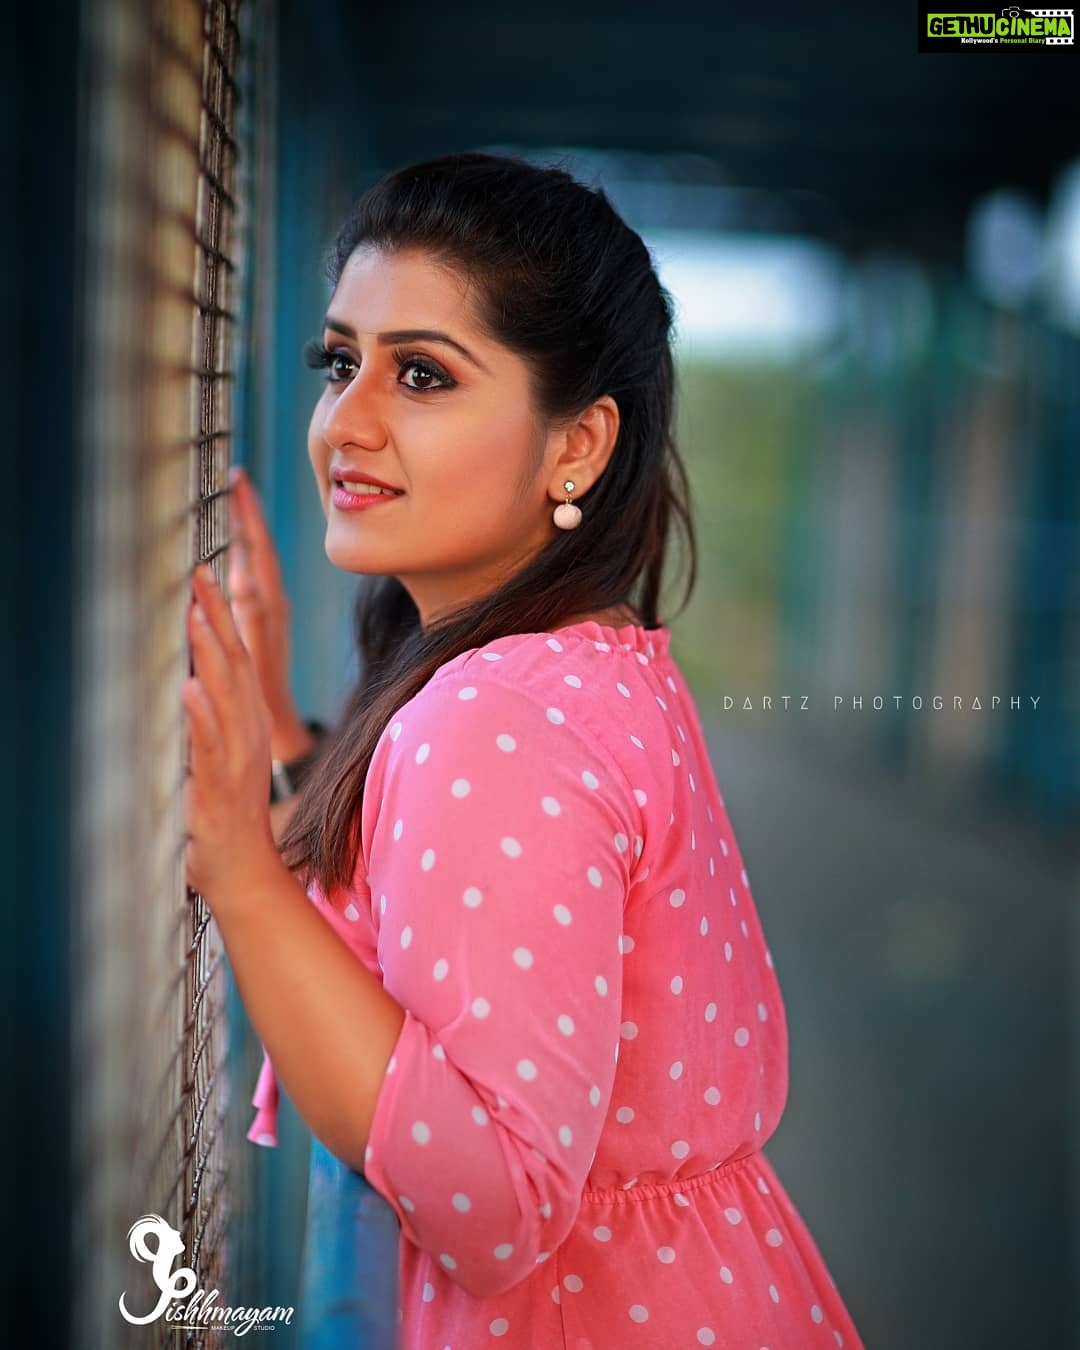 Sarayu Mohan - 27.9K Likes - Most Liked Instagram Photos